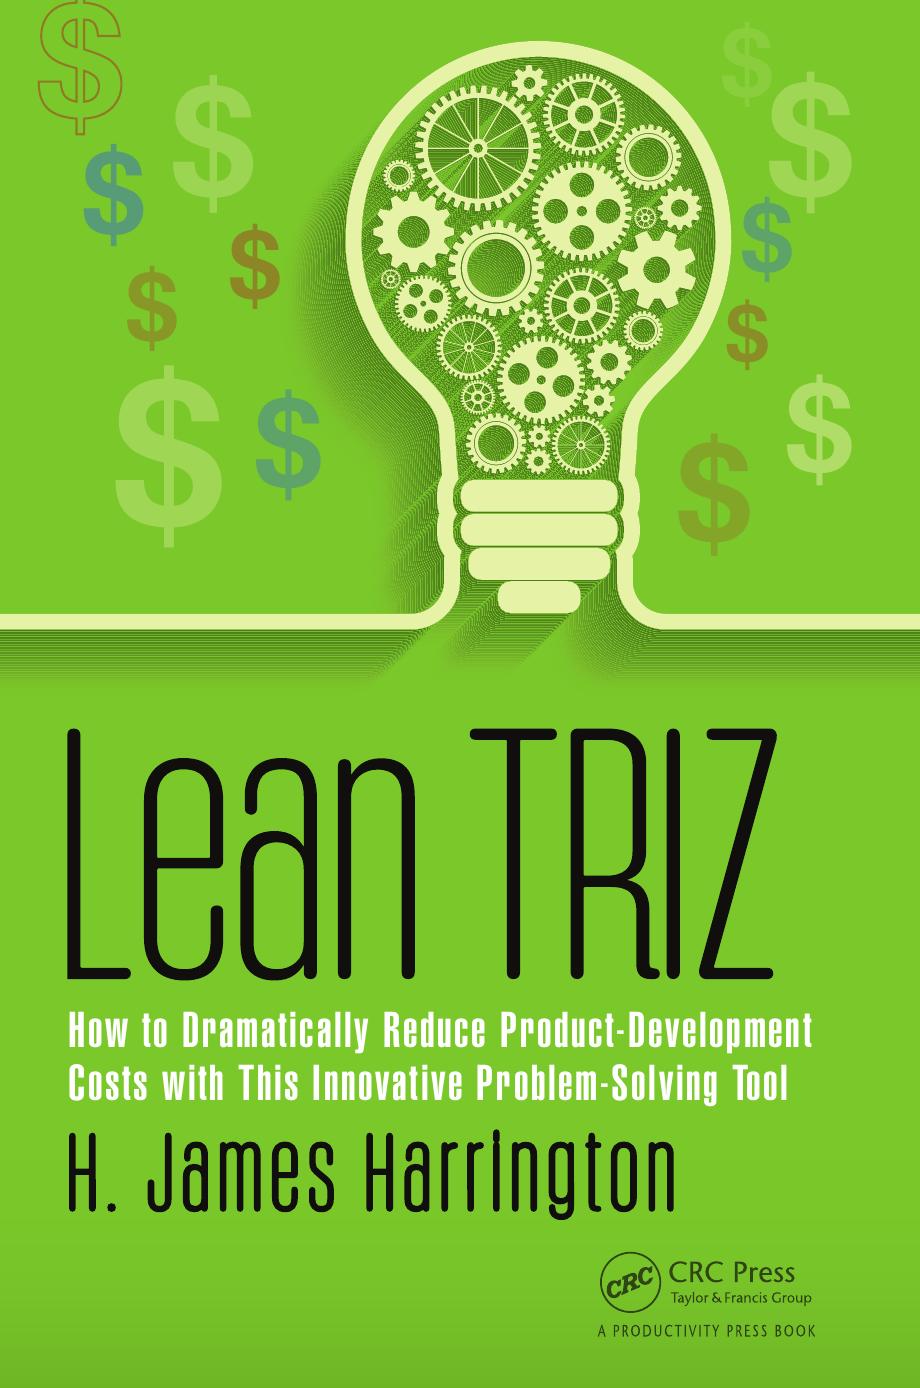 Lean TRIZ: How to Dramatically Reduce Product-Development Costs With This Innovative Problem-Solving Tool